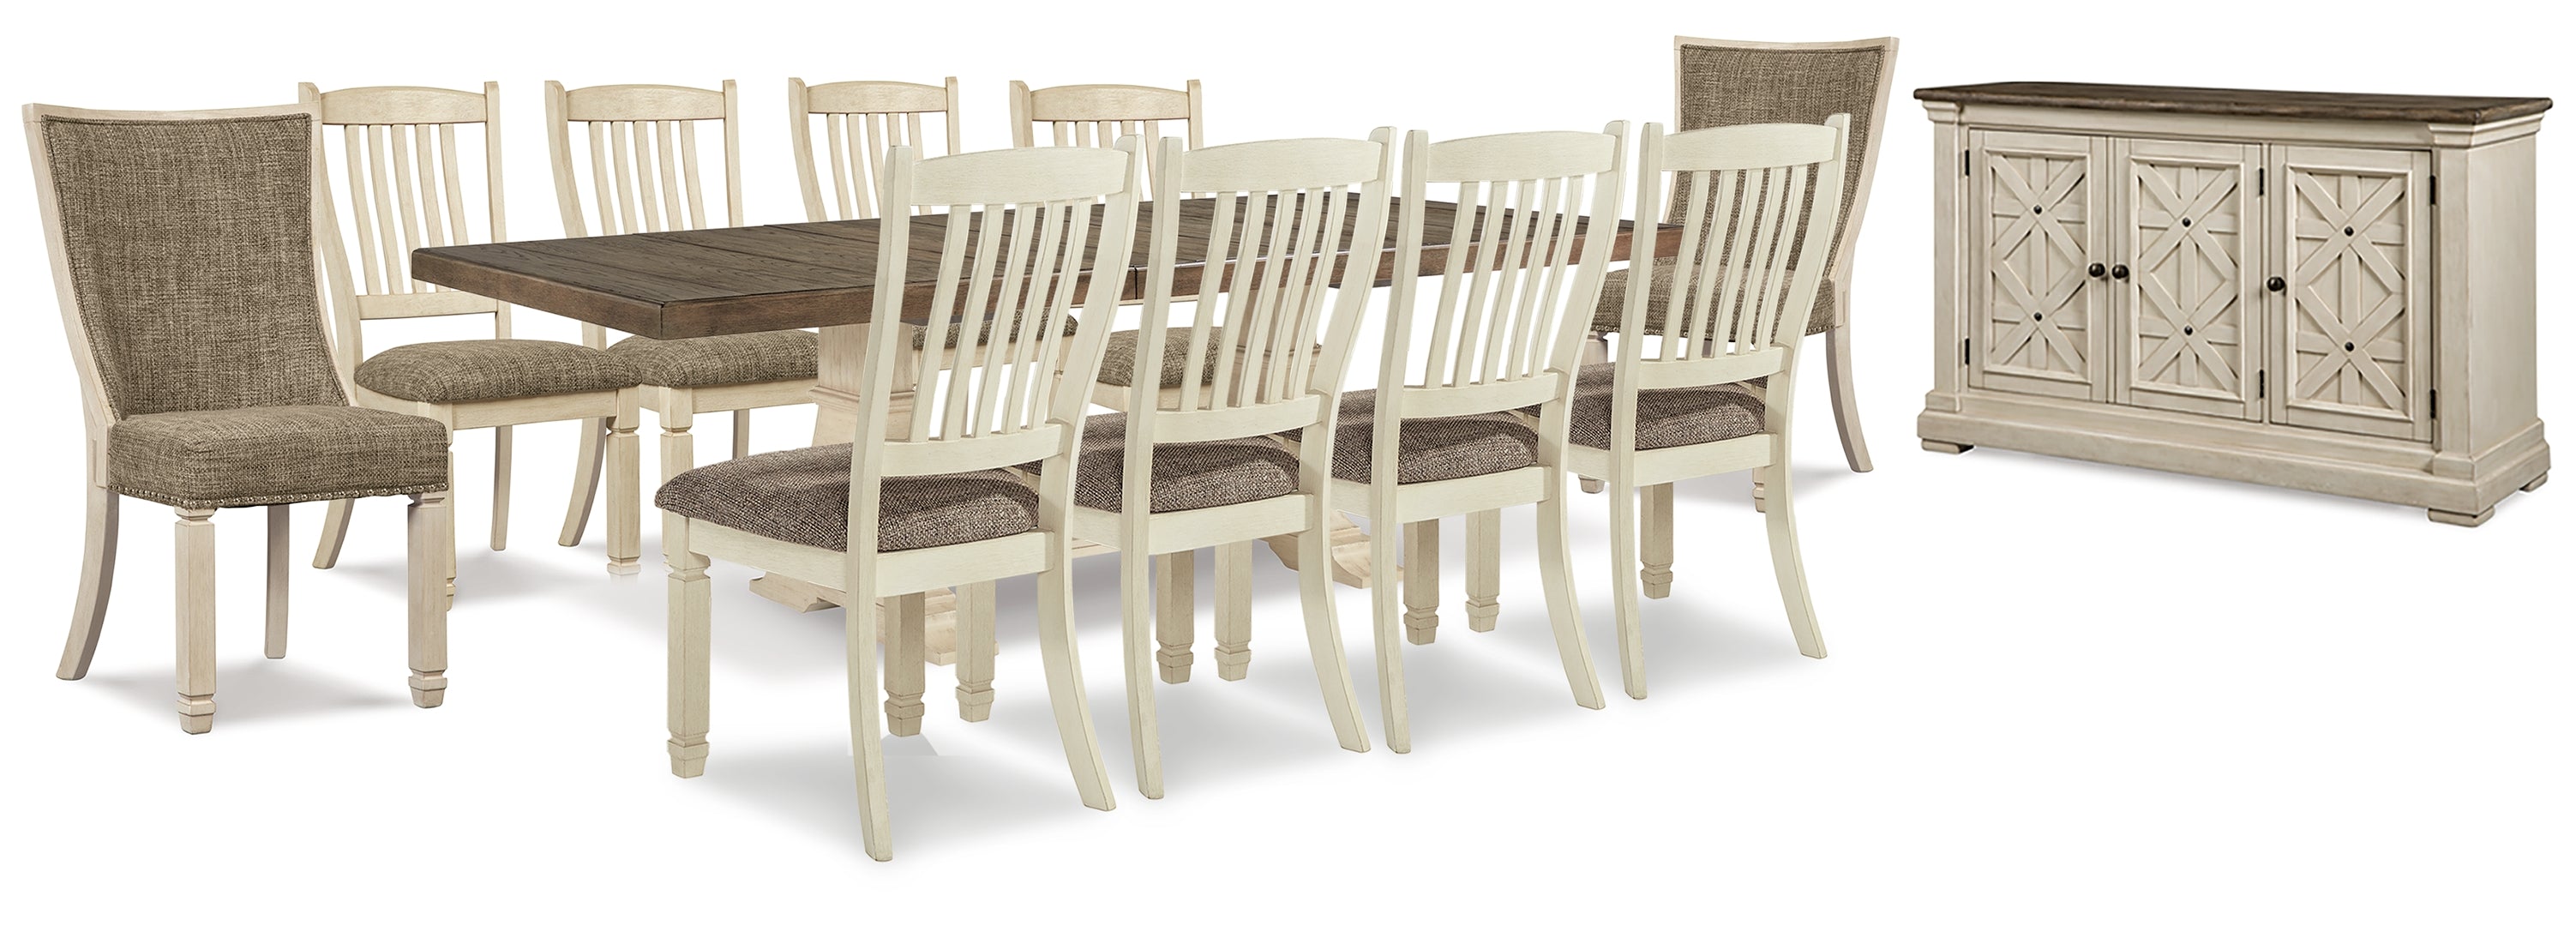 Bolanburg Dining Table and 10 Chairs